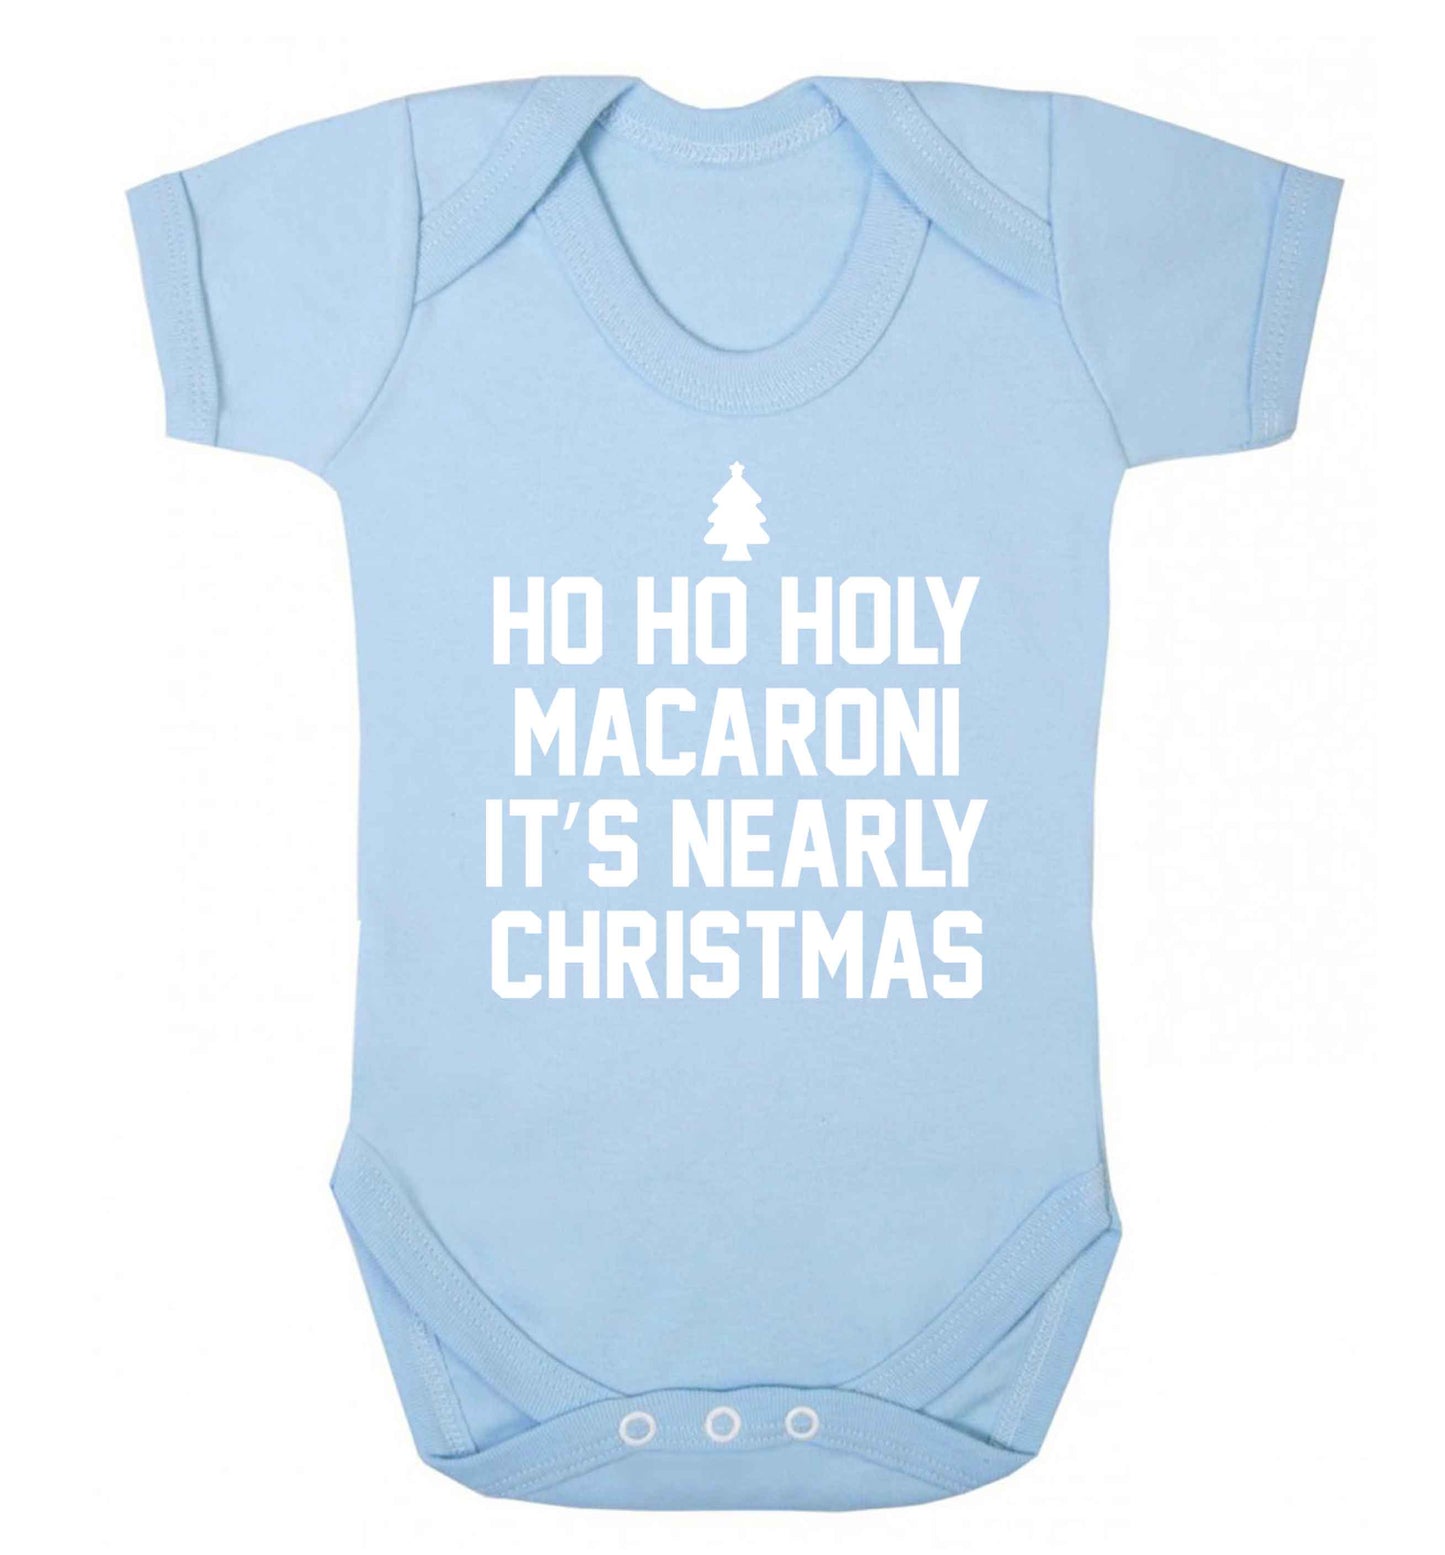 Ho ho holy macaroni it's nearly Christmas Baby Vest pale blue 18-24 months